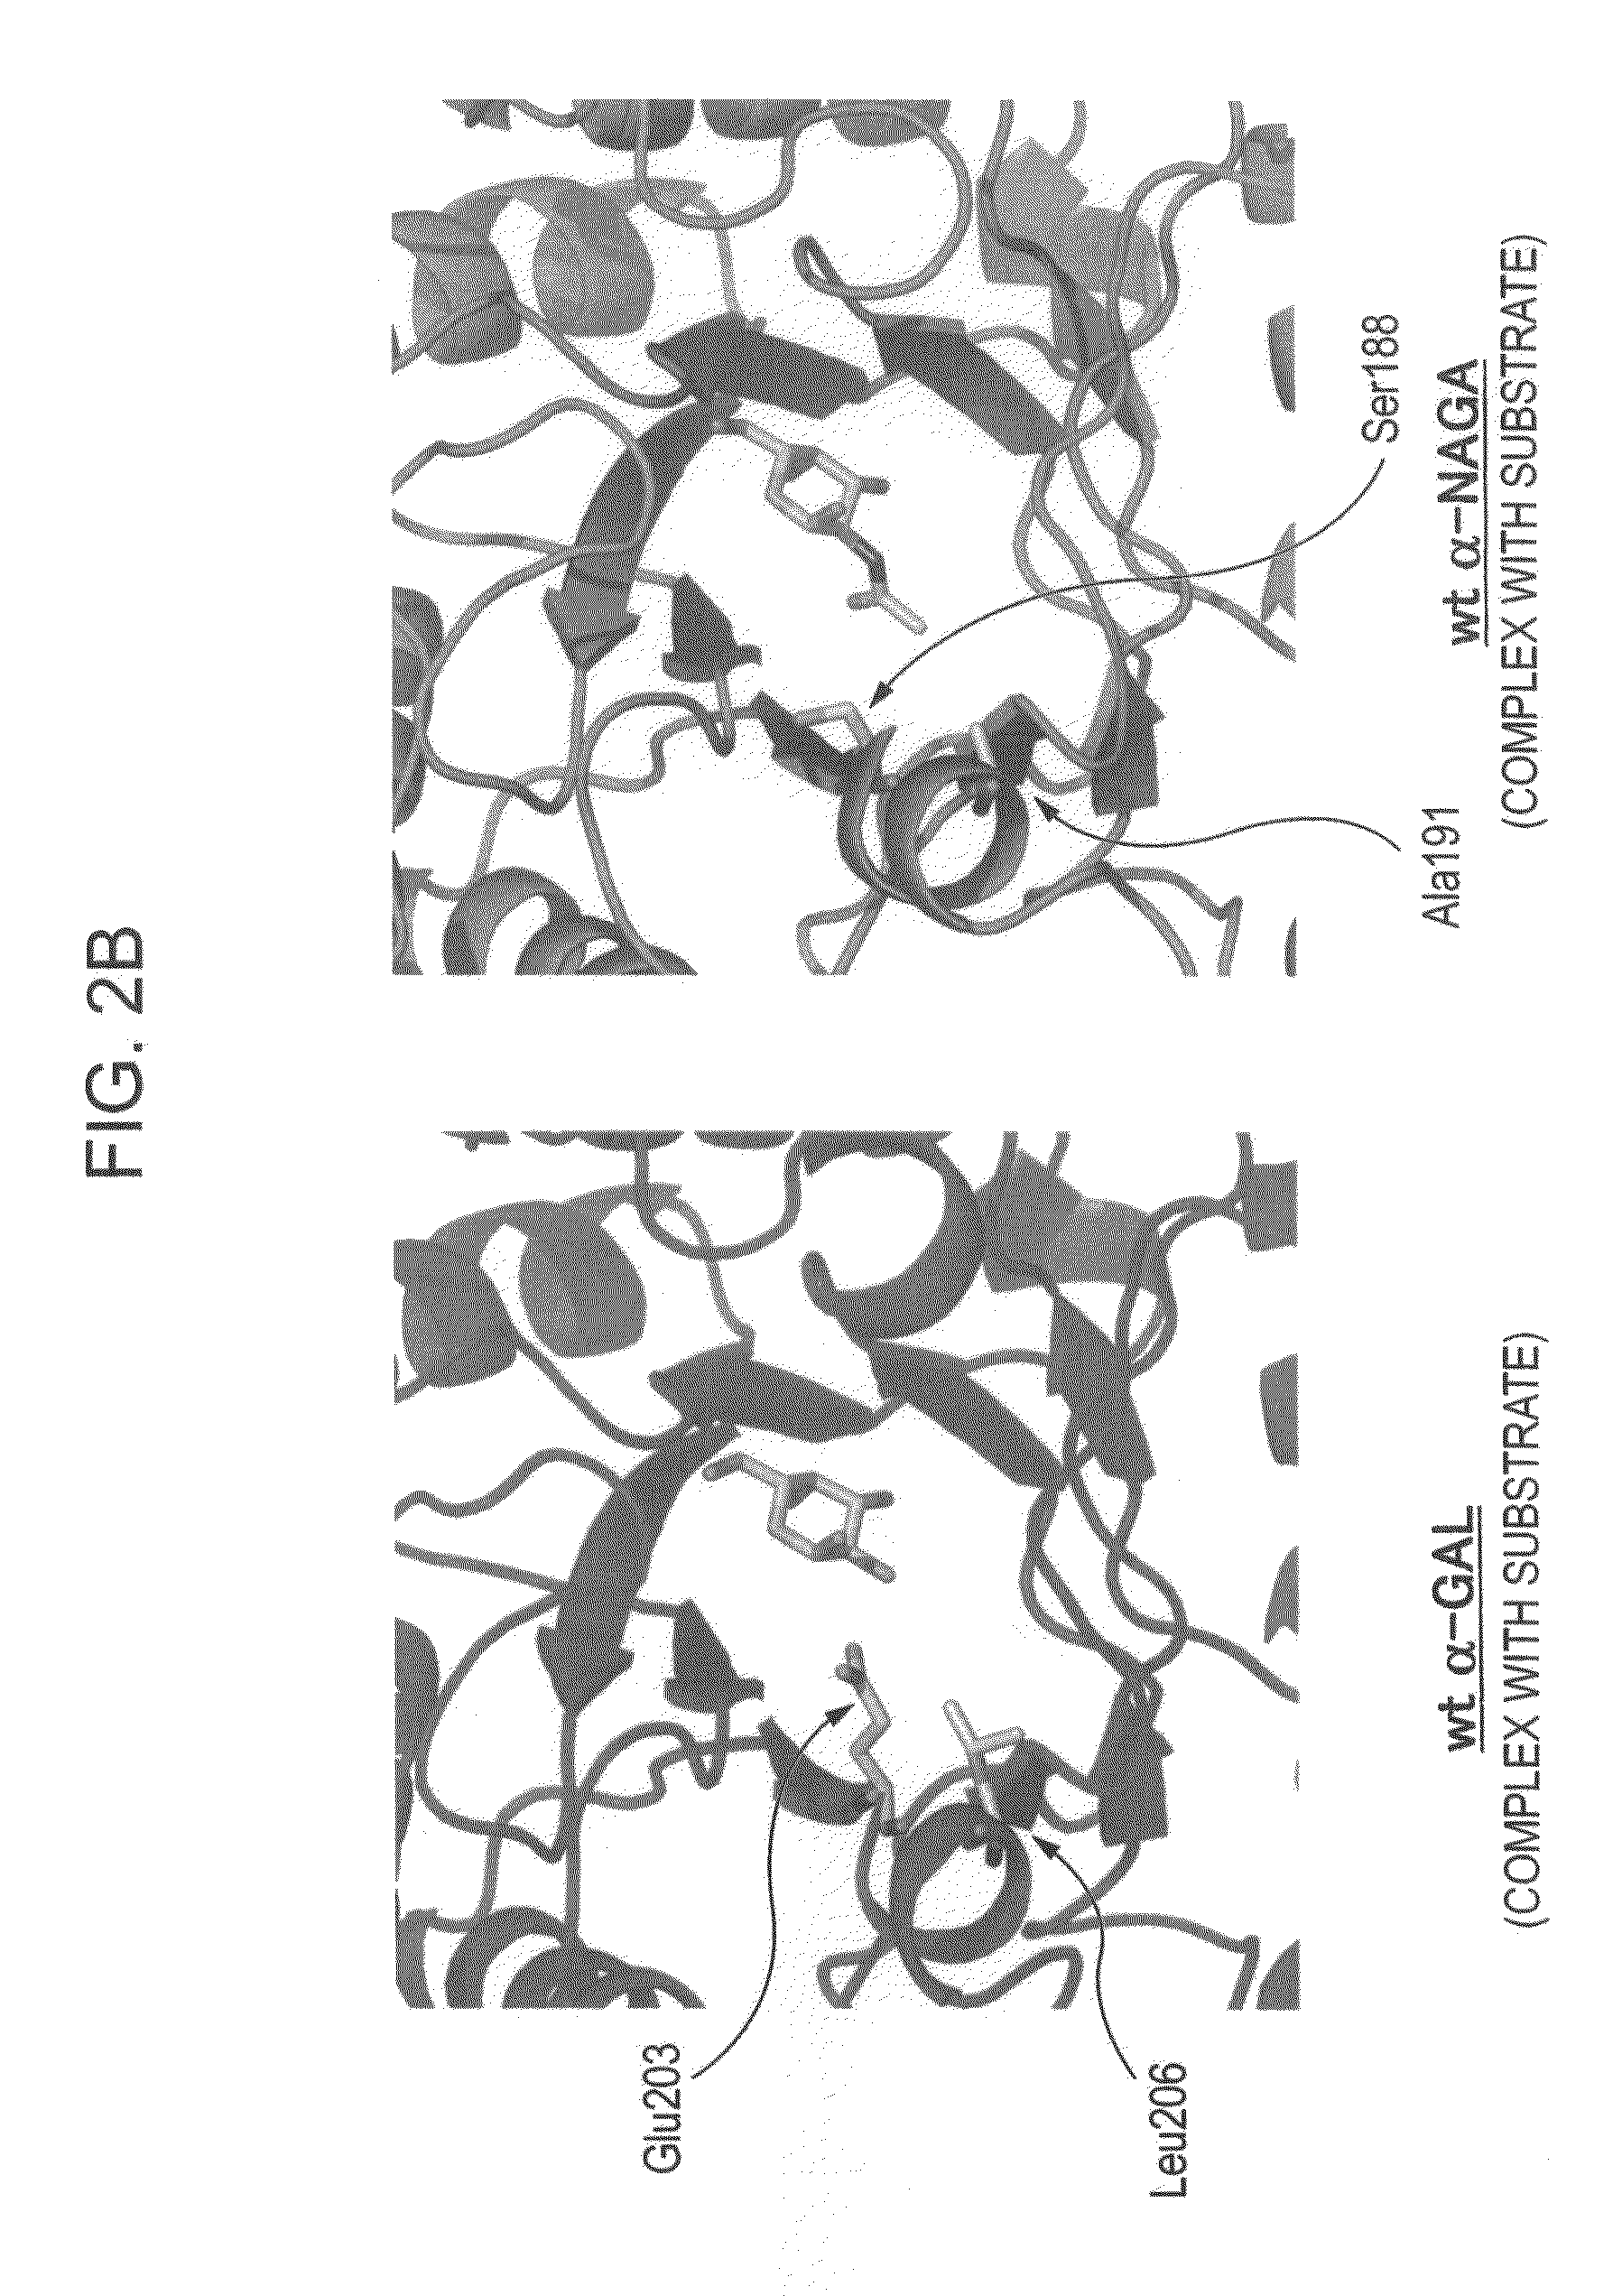 Highly functional enzyme having α-galactosidase activity